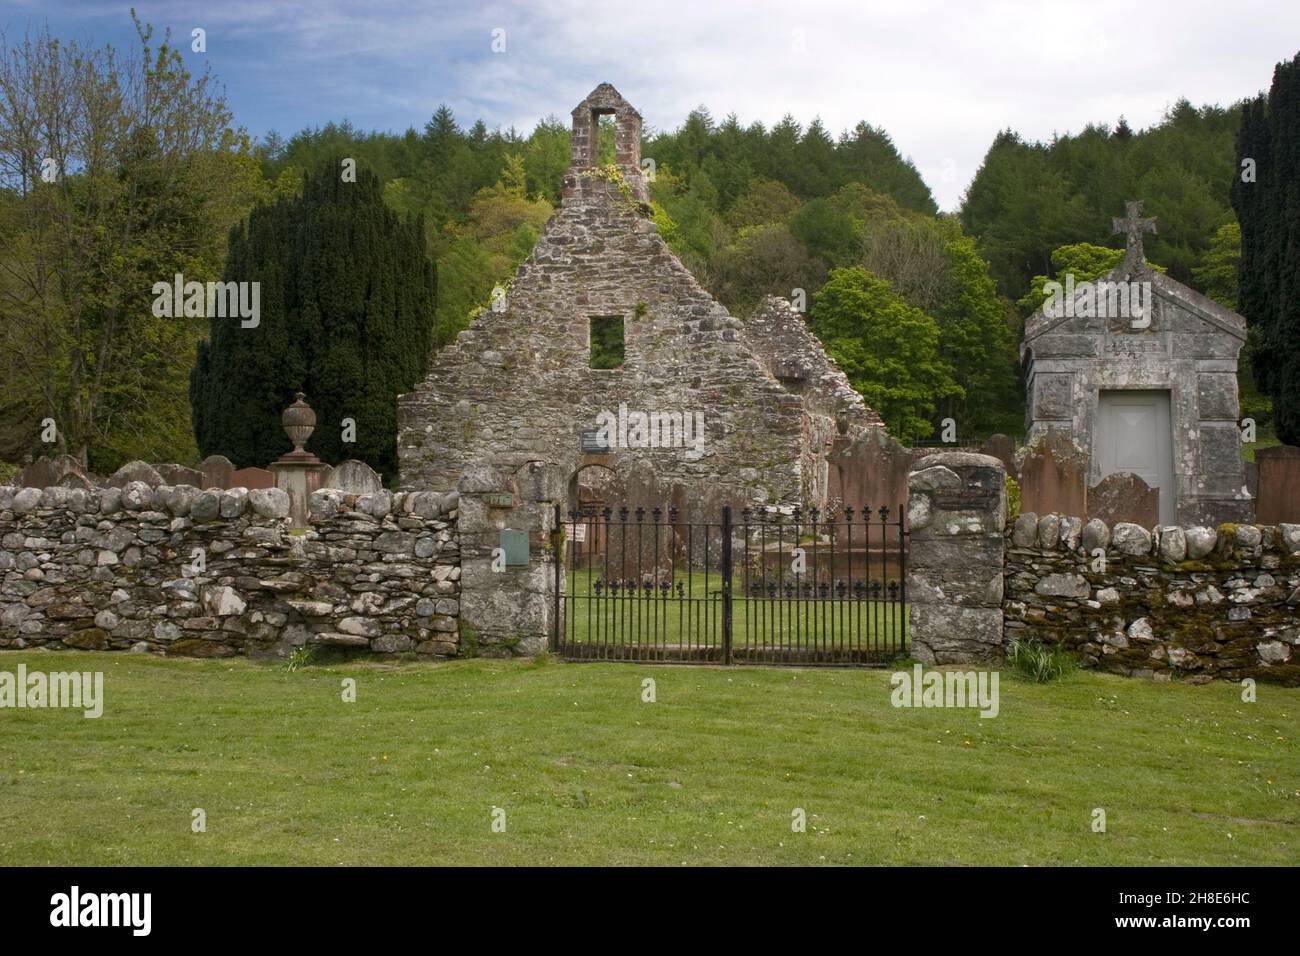 Anworth old Church ruins built in 1626, location used in horror film, the Wicker Man, Gatehouse of Fleet, Dumfries & Galloway, Scotland Stock Photo